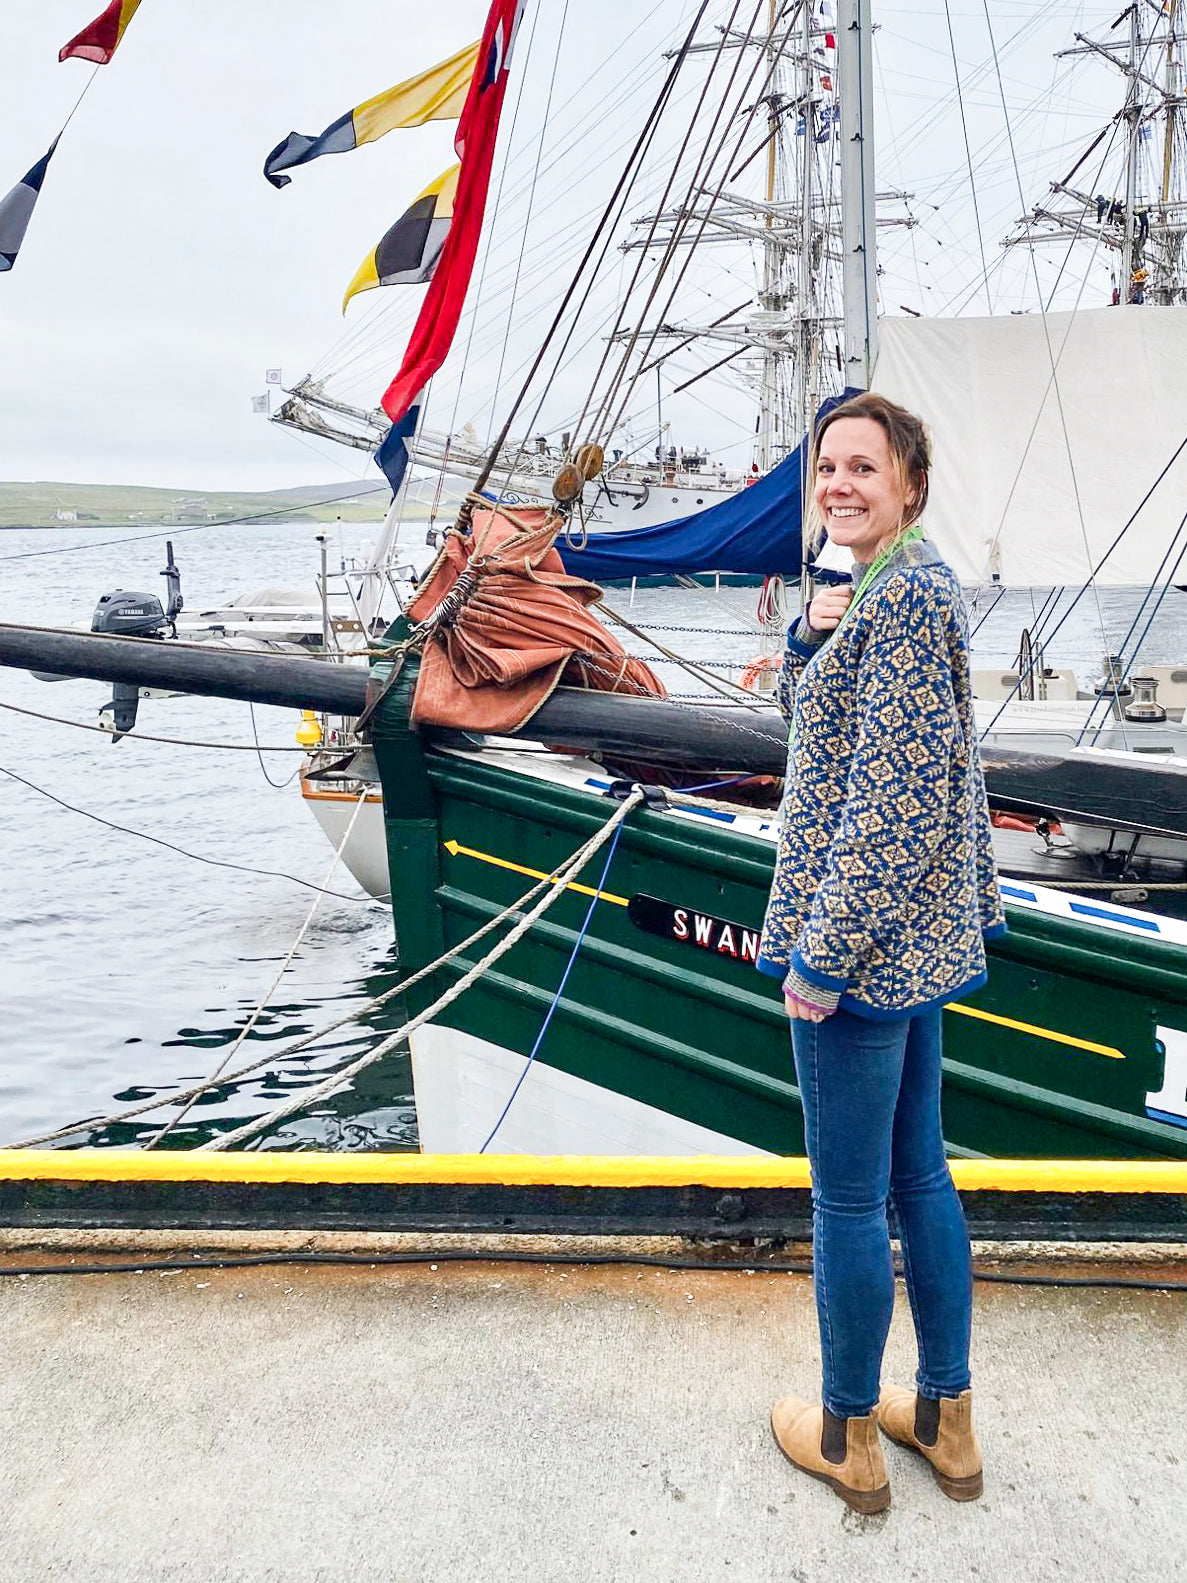 A white woman with her light brown hair tied back stands on the quayside in Lerwick. She turns and faces the camera, smiling. In front of her is Swan, a hundred year old timber boat. She is wearing a fair isle style jumper in an all-over pattern in blue and yellow, jeans and tan suede dealer boots.